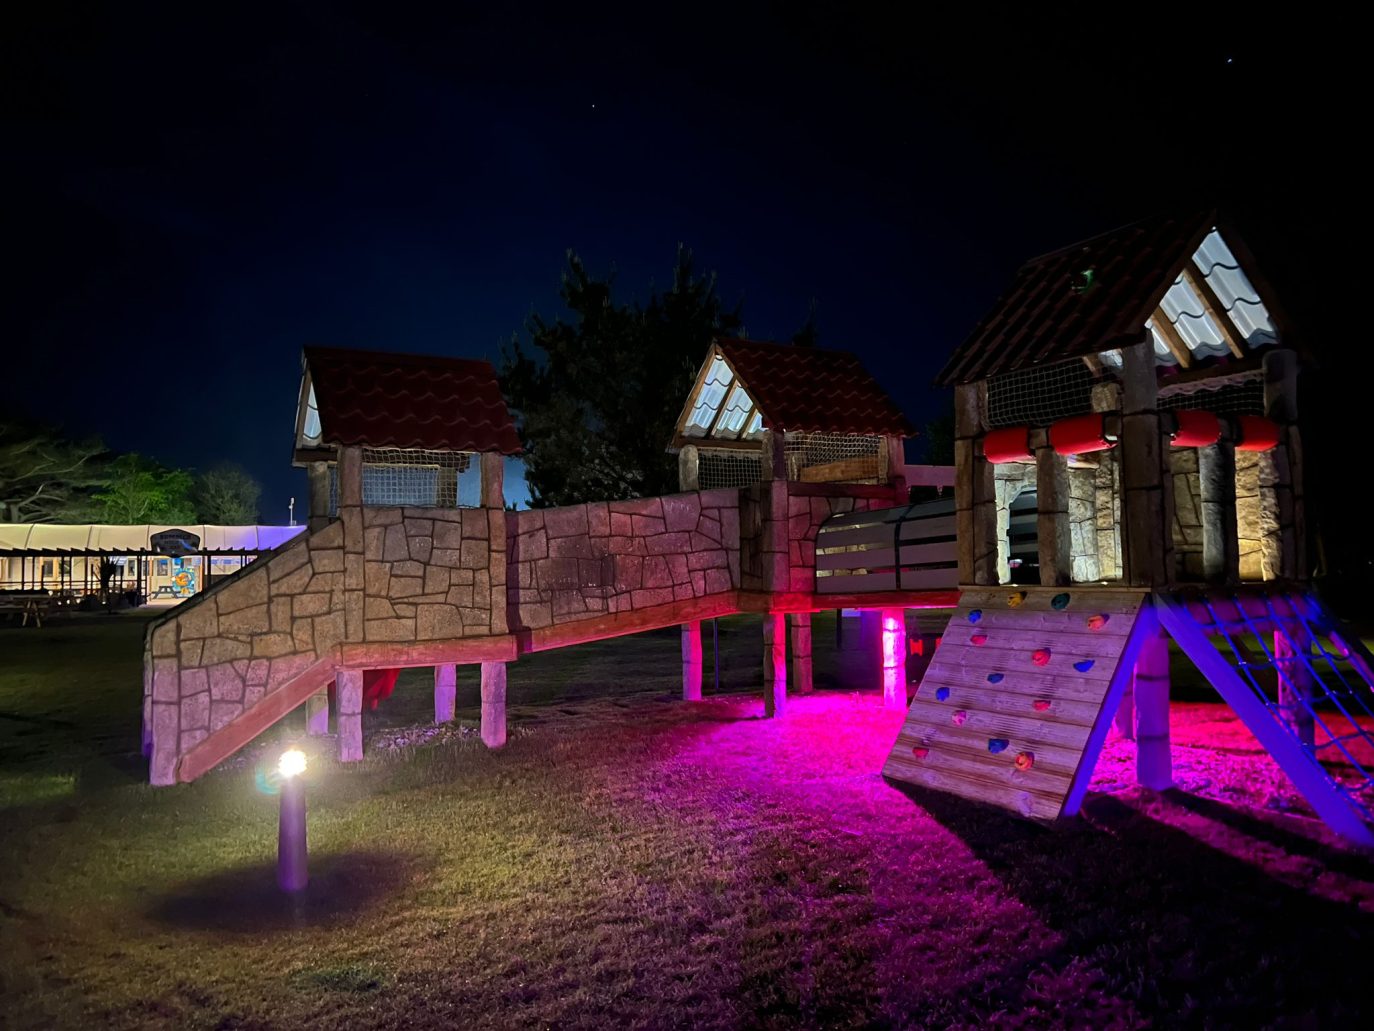 A nighttime image of an illuminated playground featuring a climbing wall, slides, and monkey tree, highlighted with vibrant purple and red lights under a starry sky.